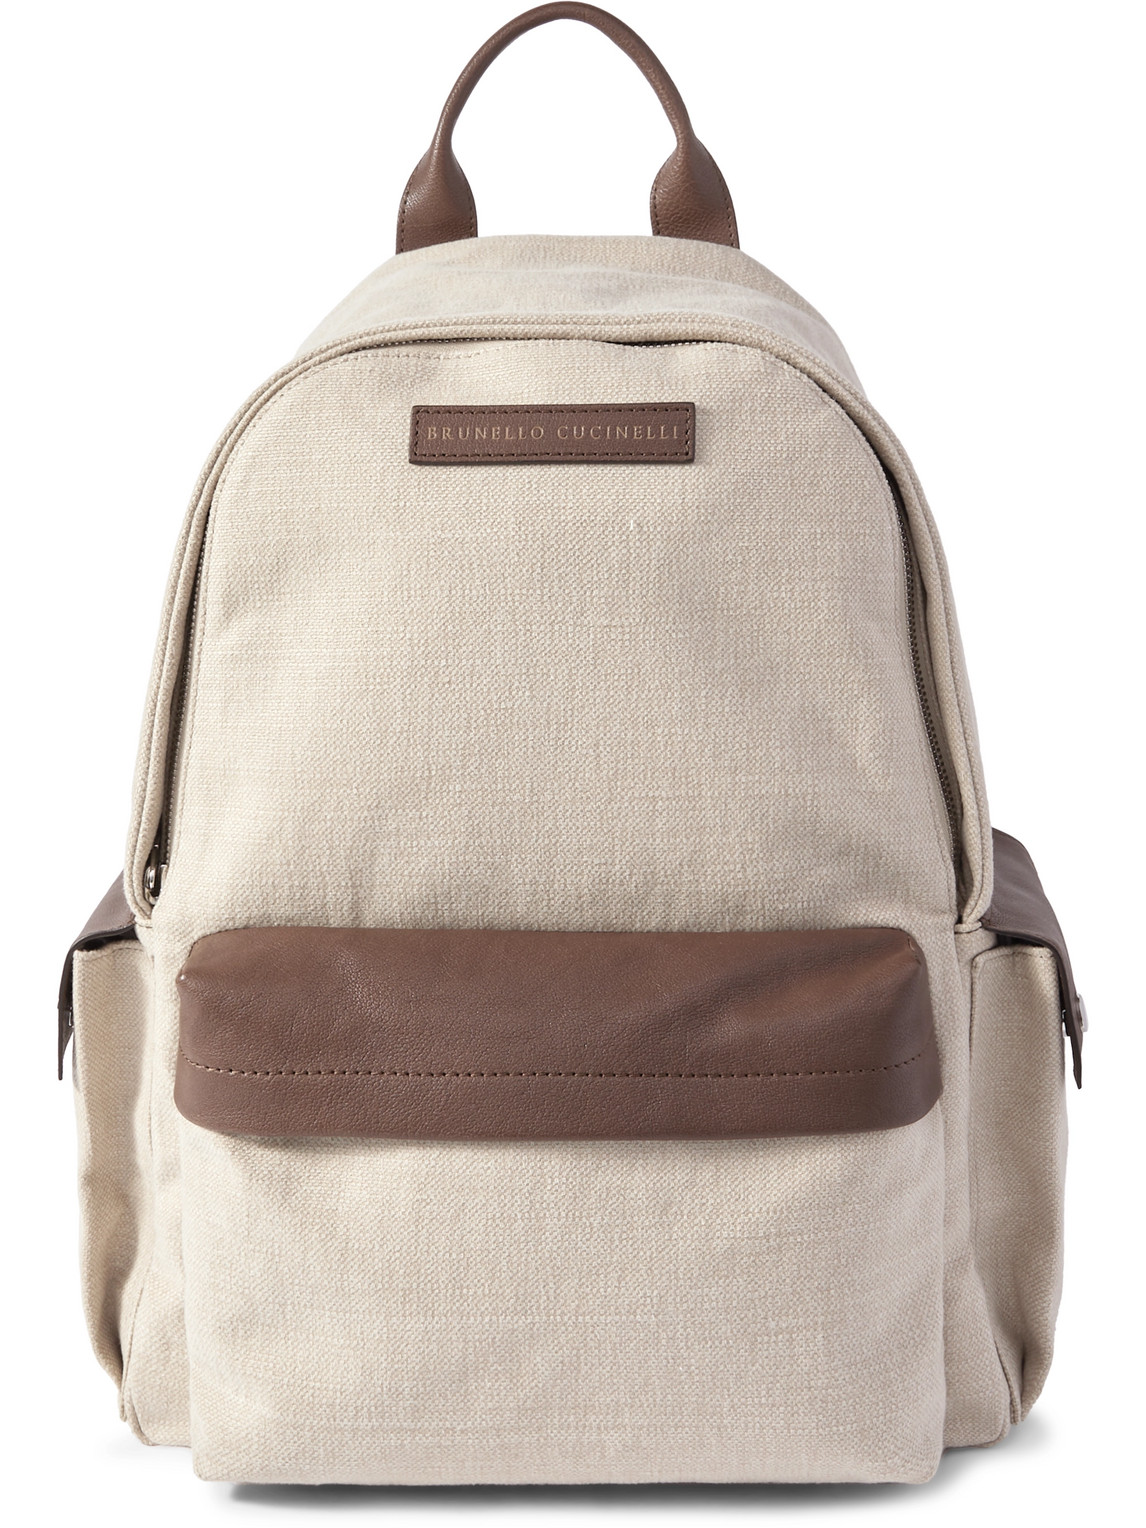 Logo-Appliquéd Leather and Suede-Trimmed Canvas Backpack